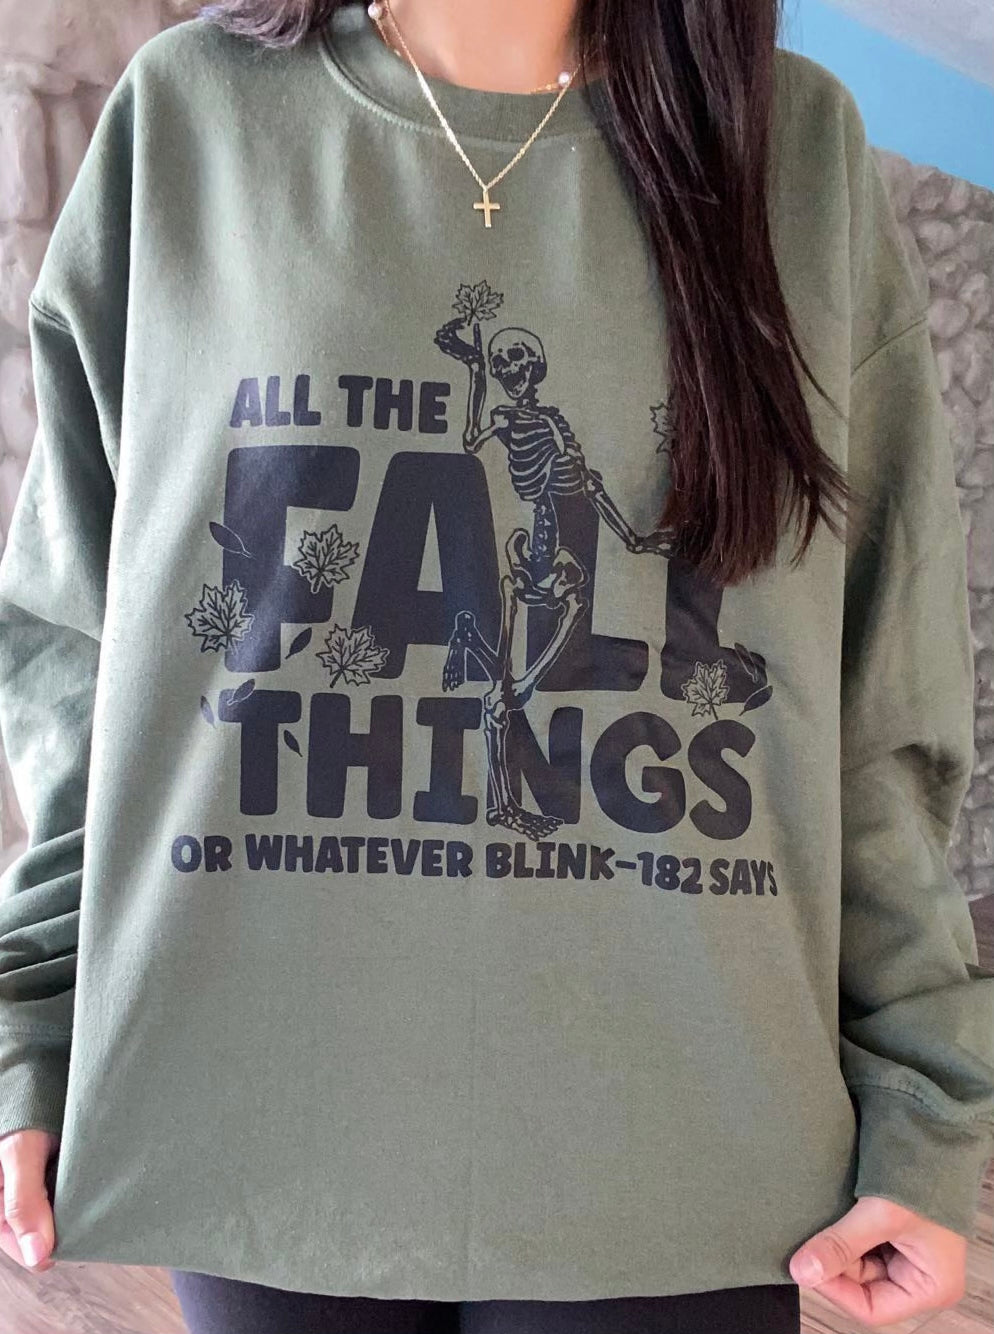 All the fall things or whatever blink 182 said | military green sweatshirt